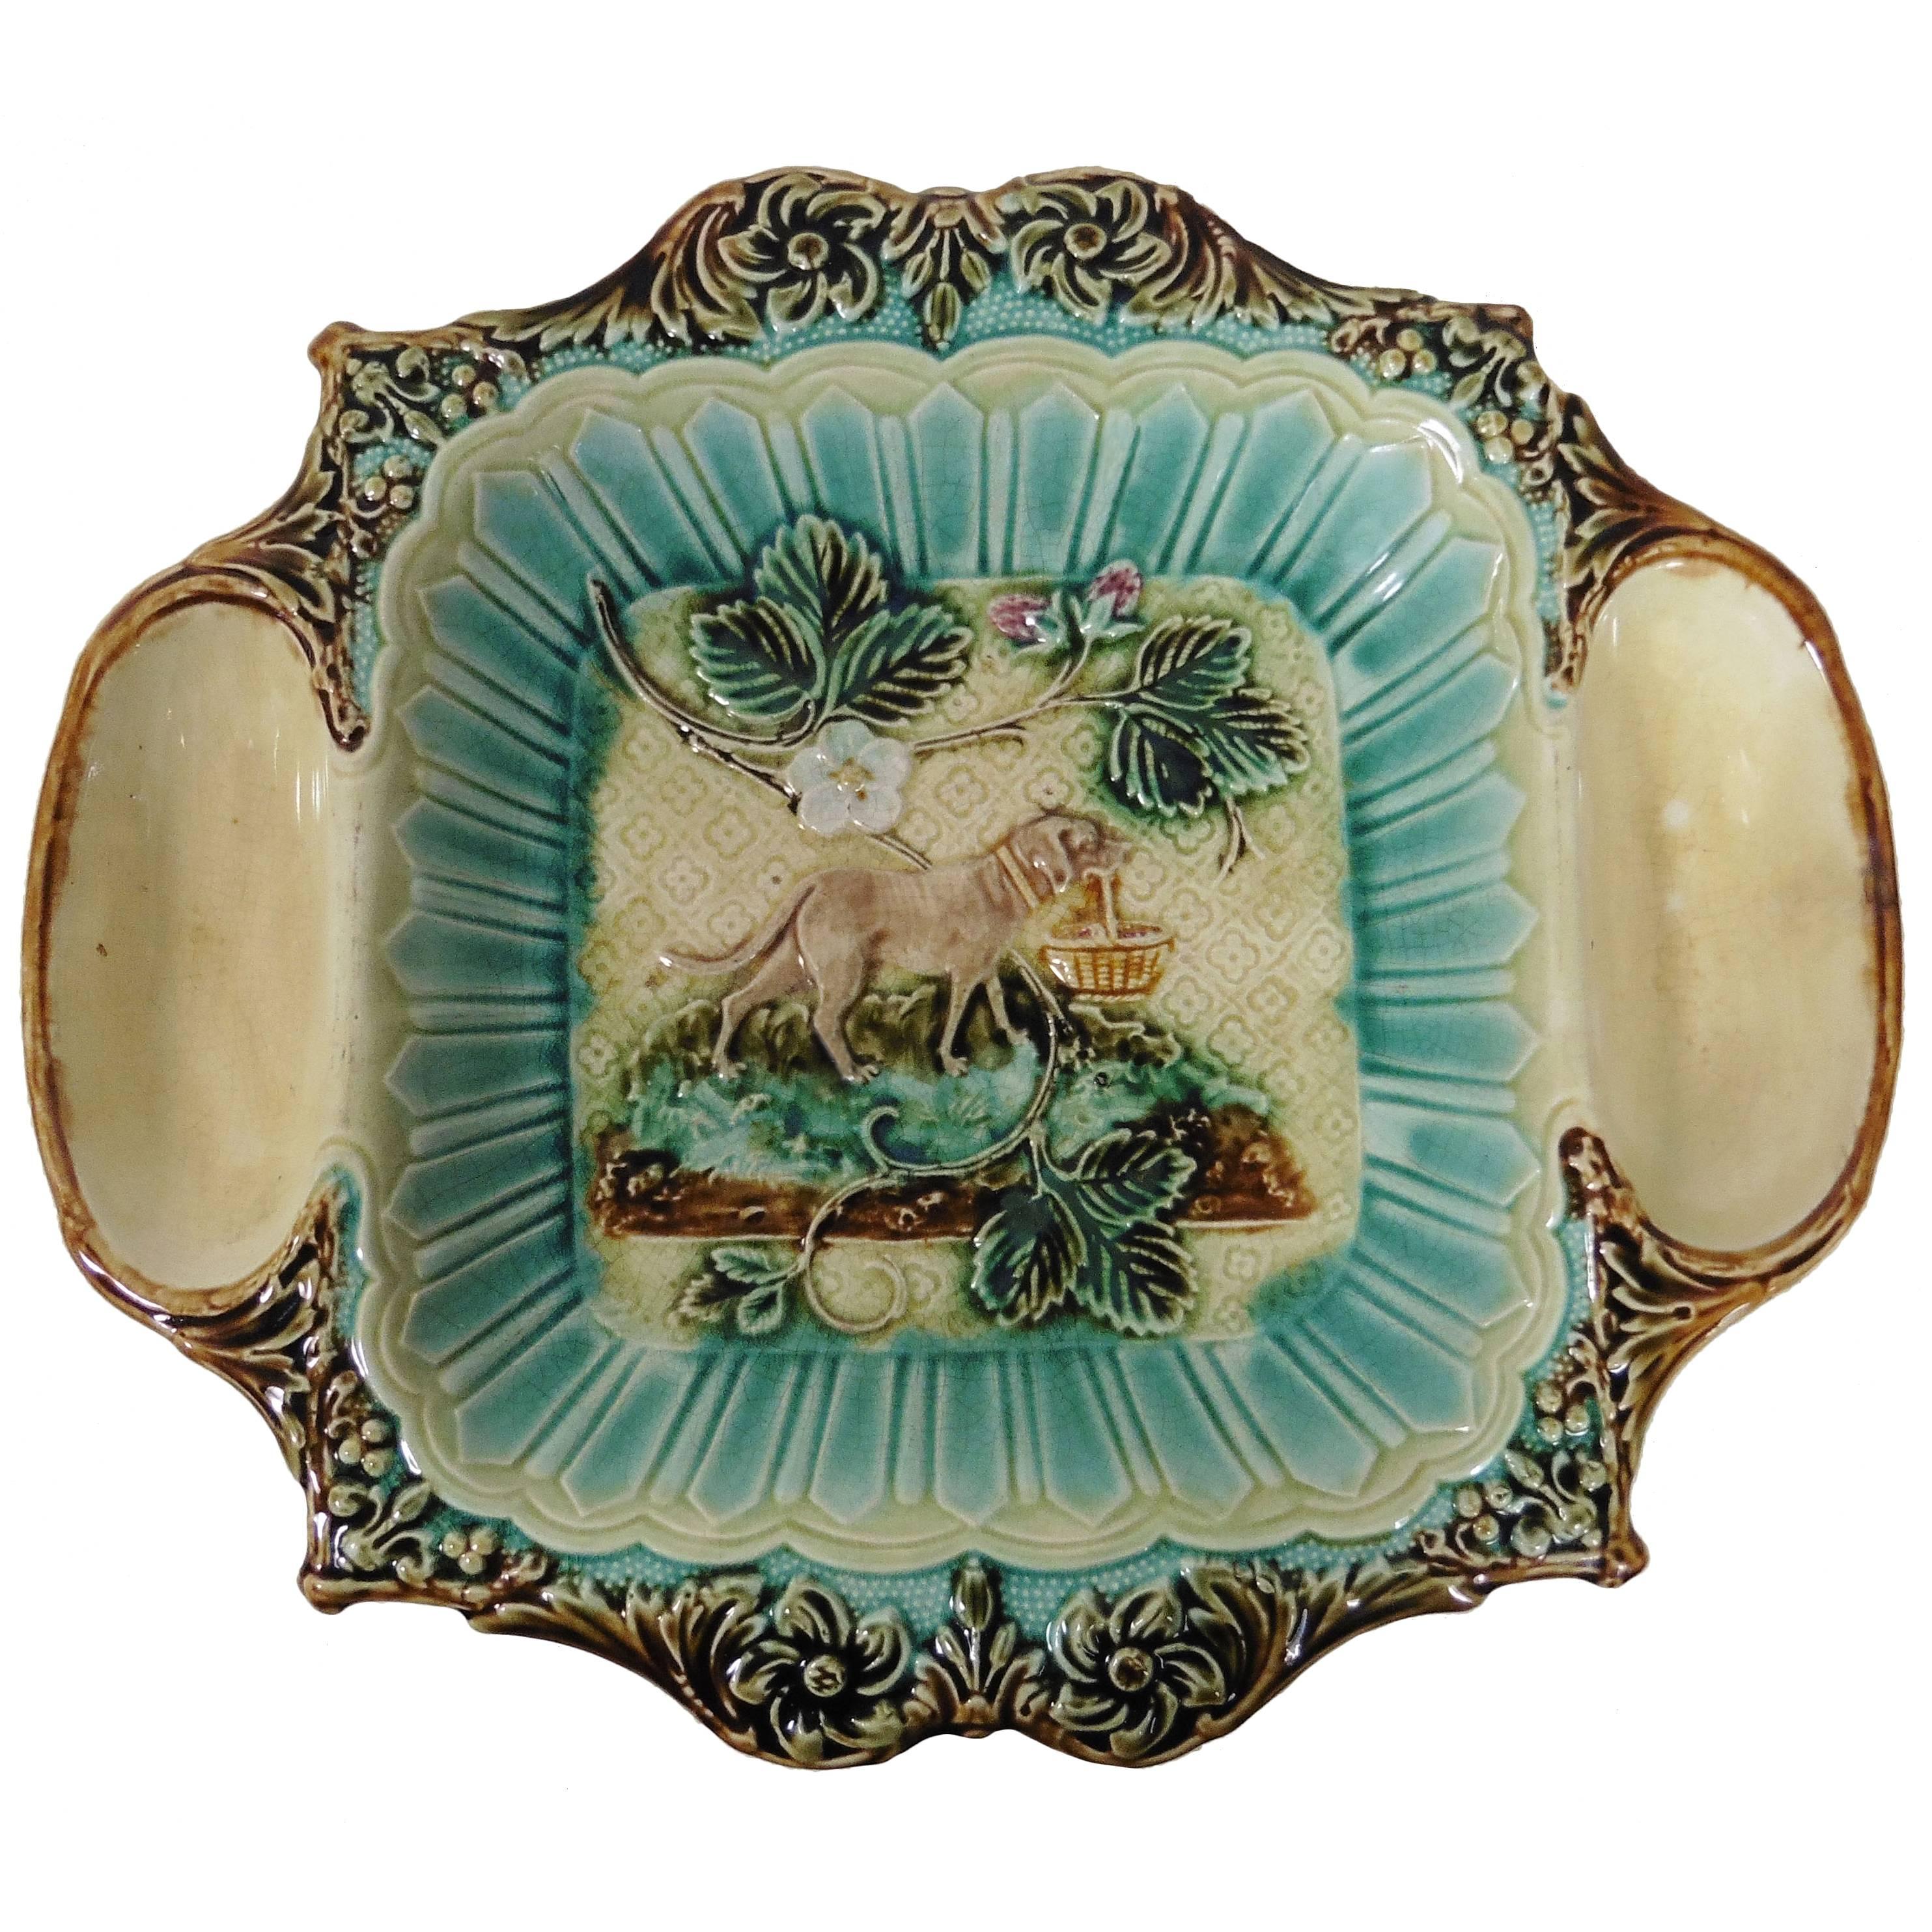 19th Century Majolica Strawberries Platter with Dog Holding a Basket